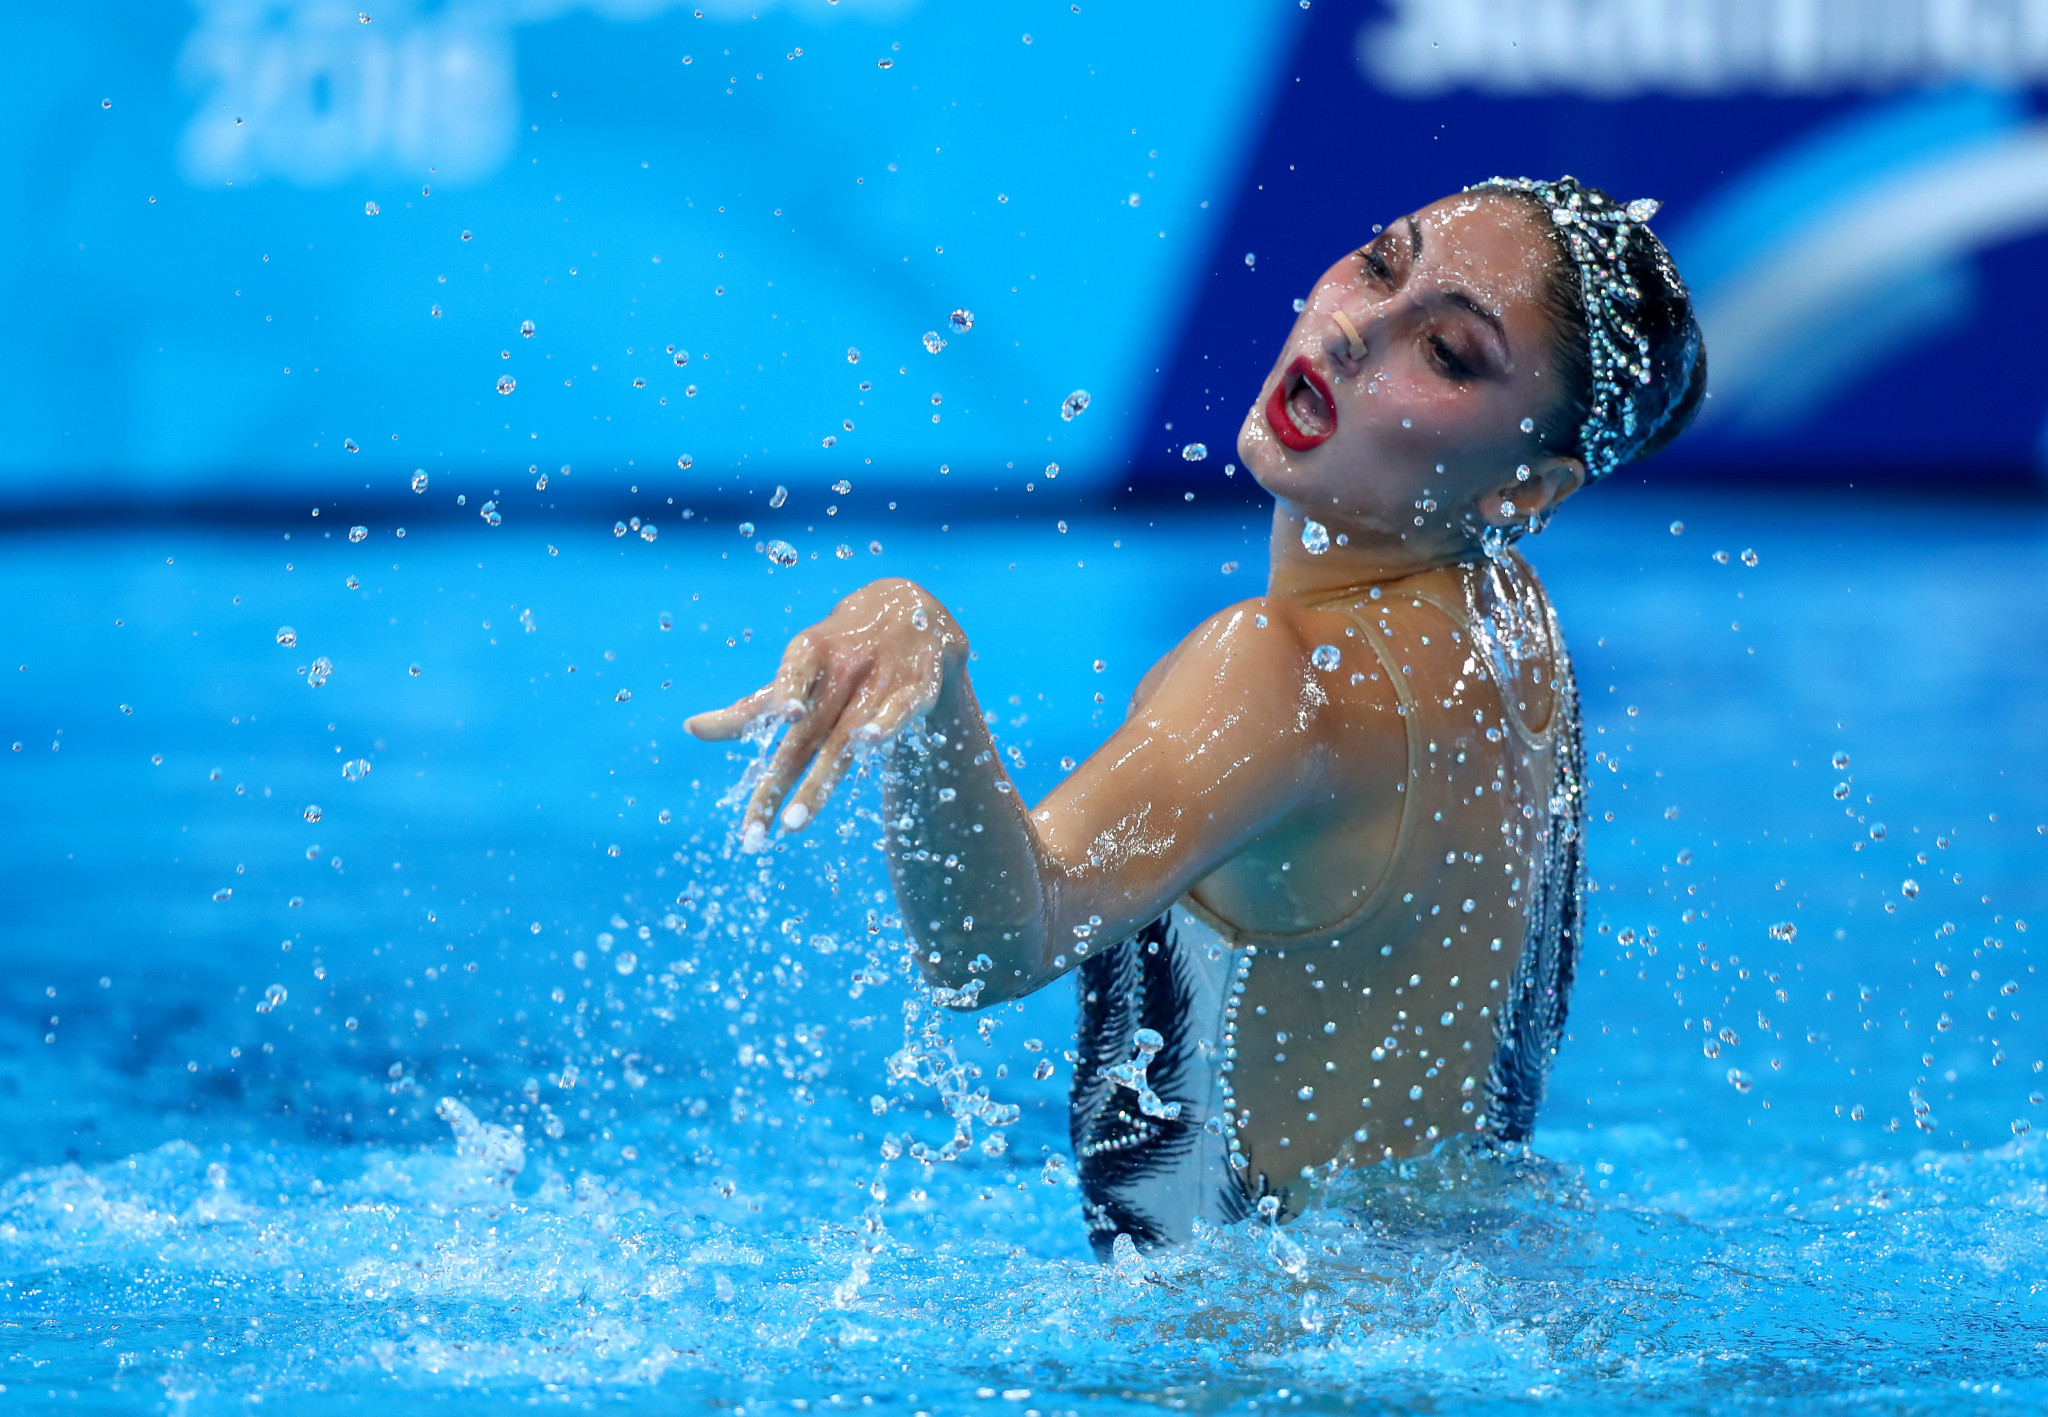 Alexandroupolis will host the second event of the Artistic Swimming World Series season ©Getty Images